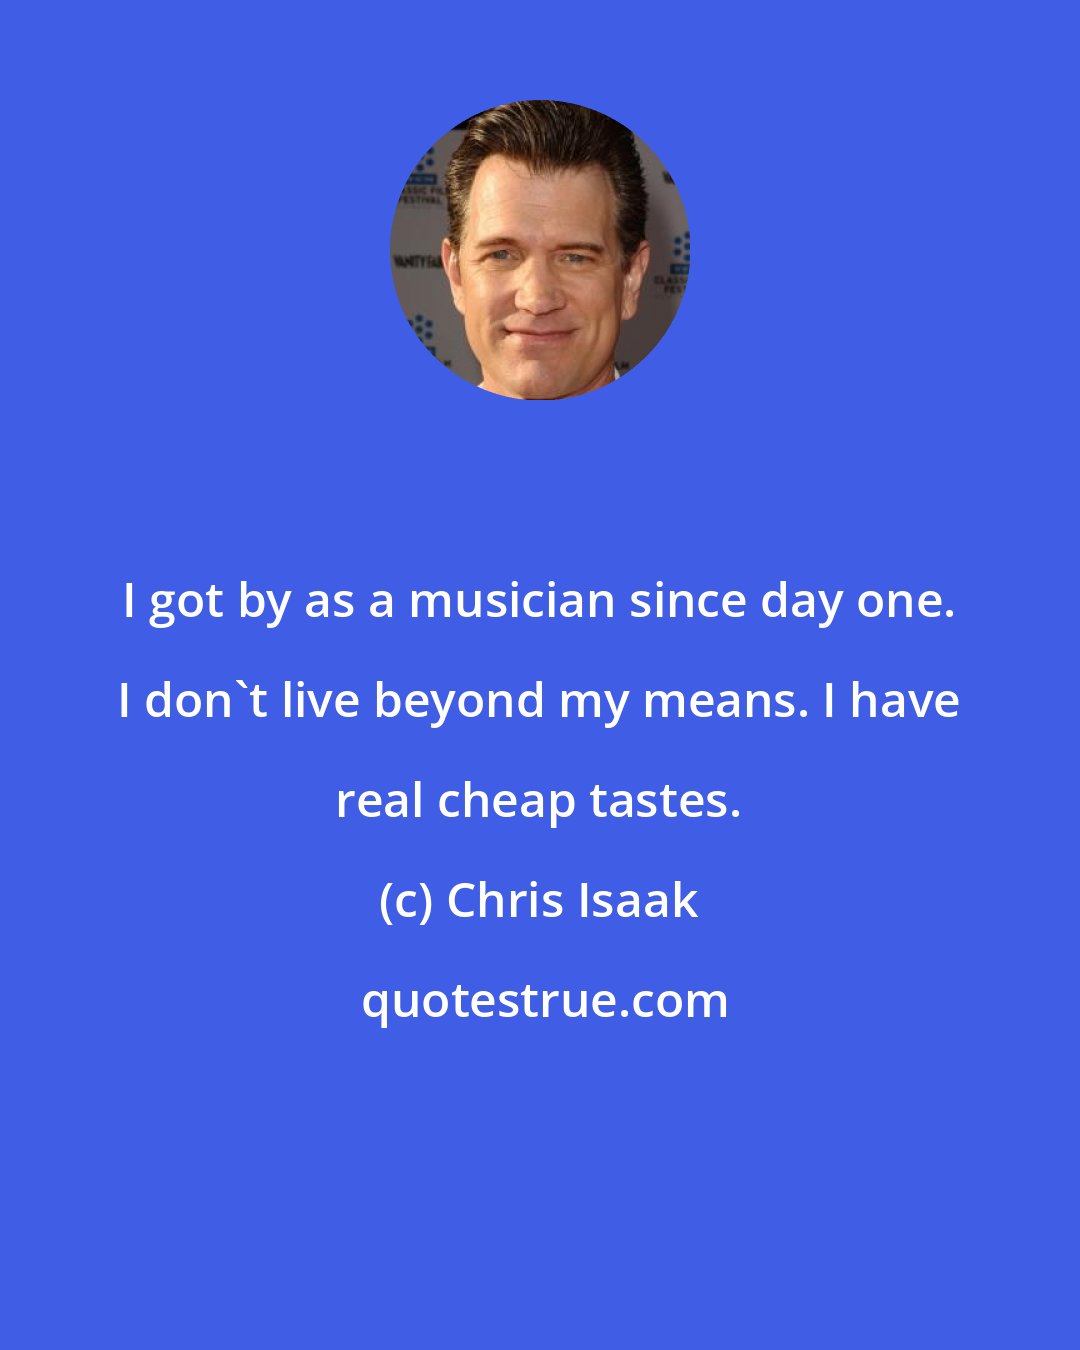 Chris Isaak: I got by as a musician since day one. I don't live beyond my means. I have real cheap tastes.